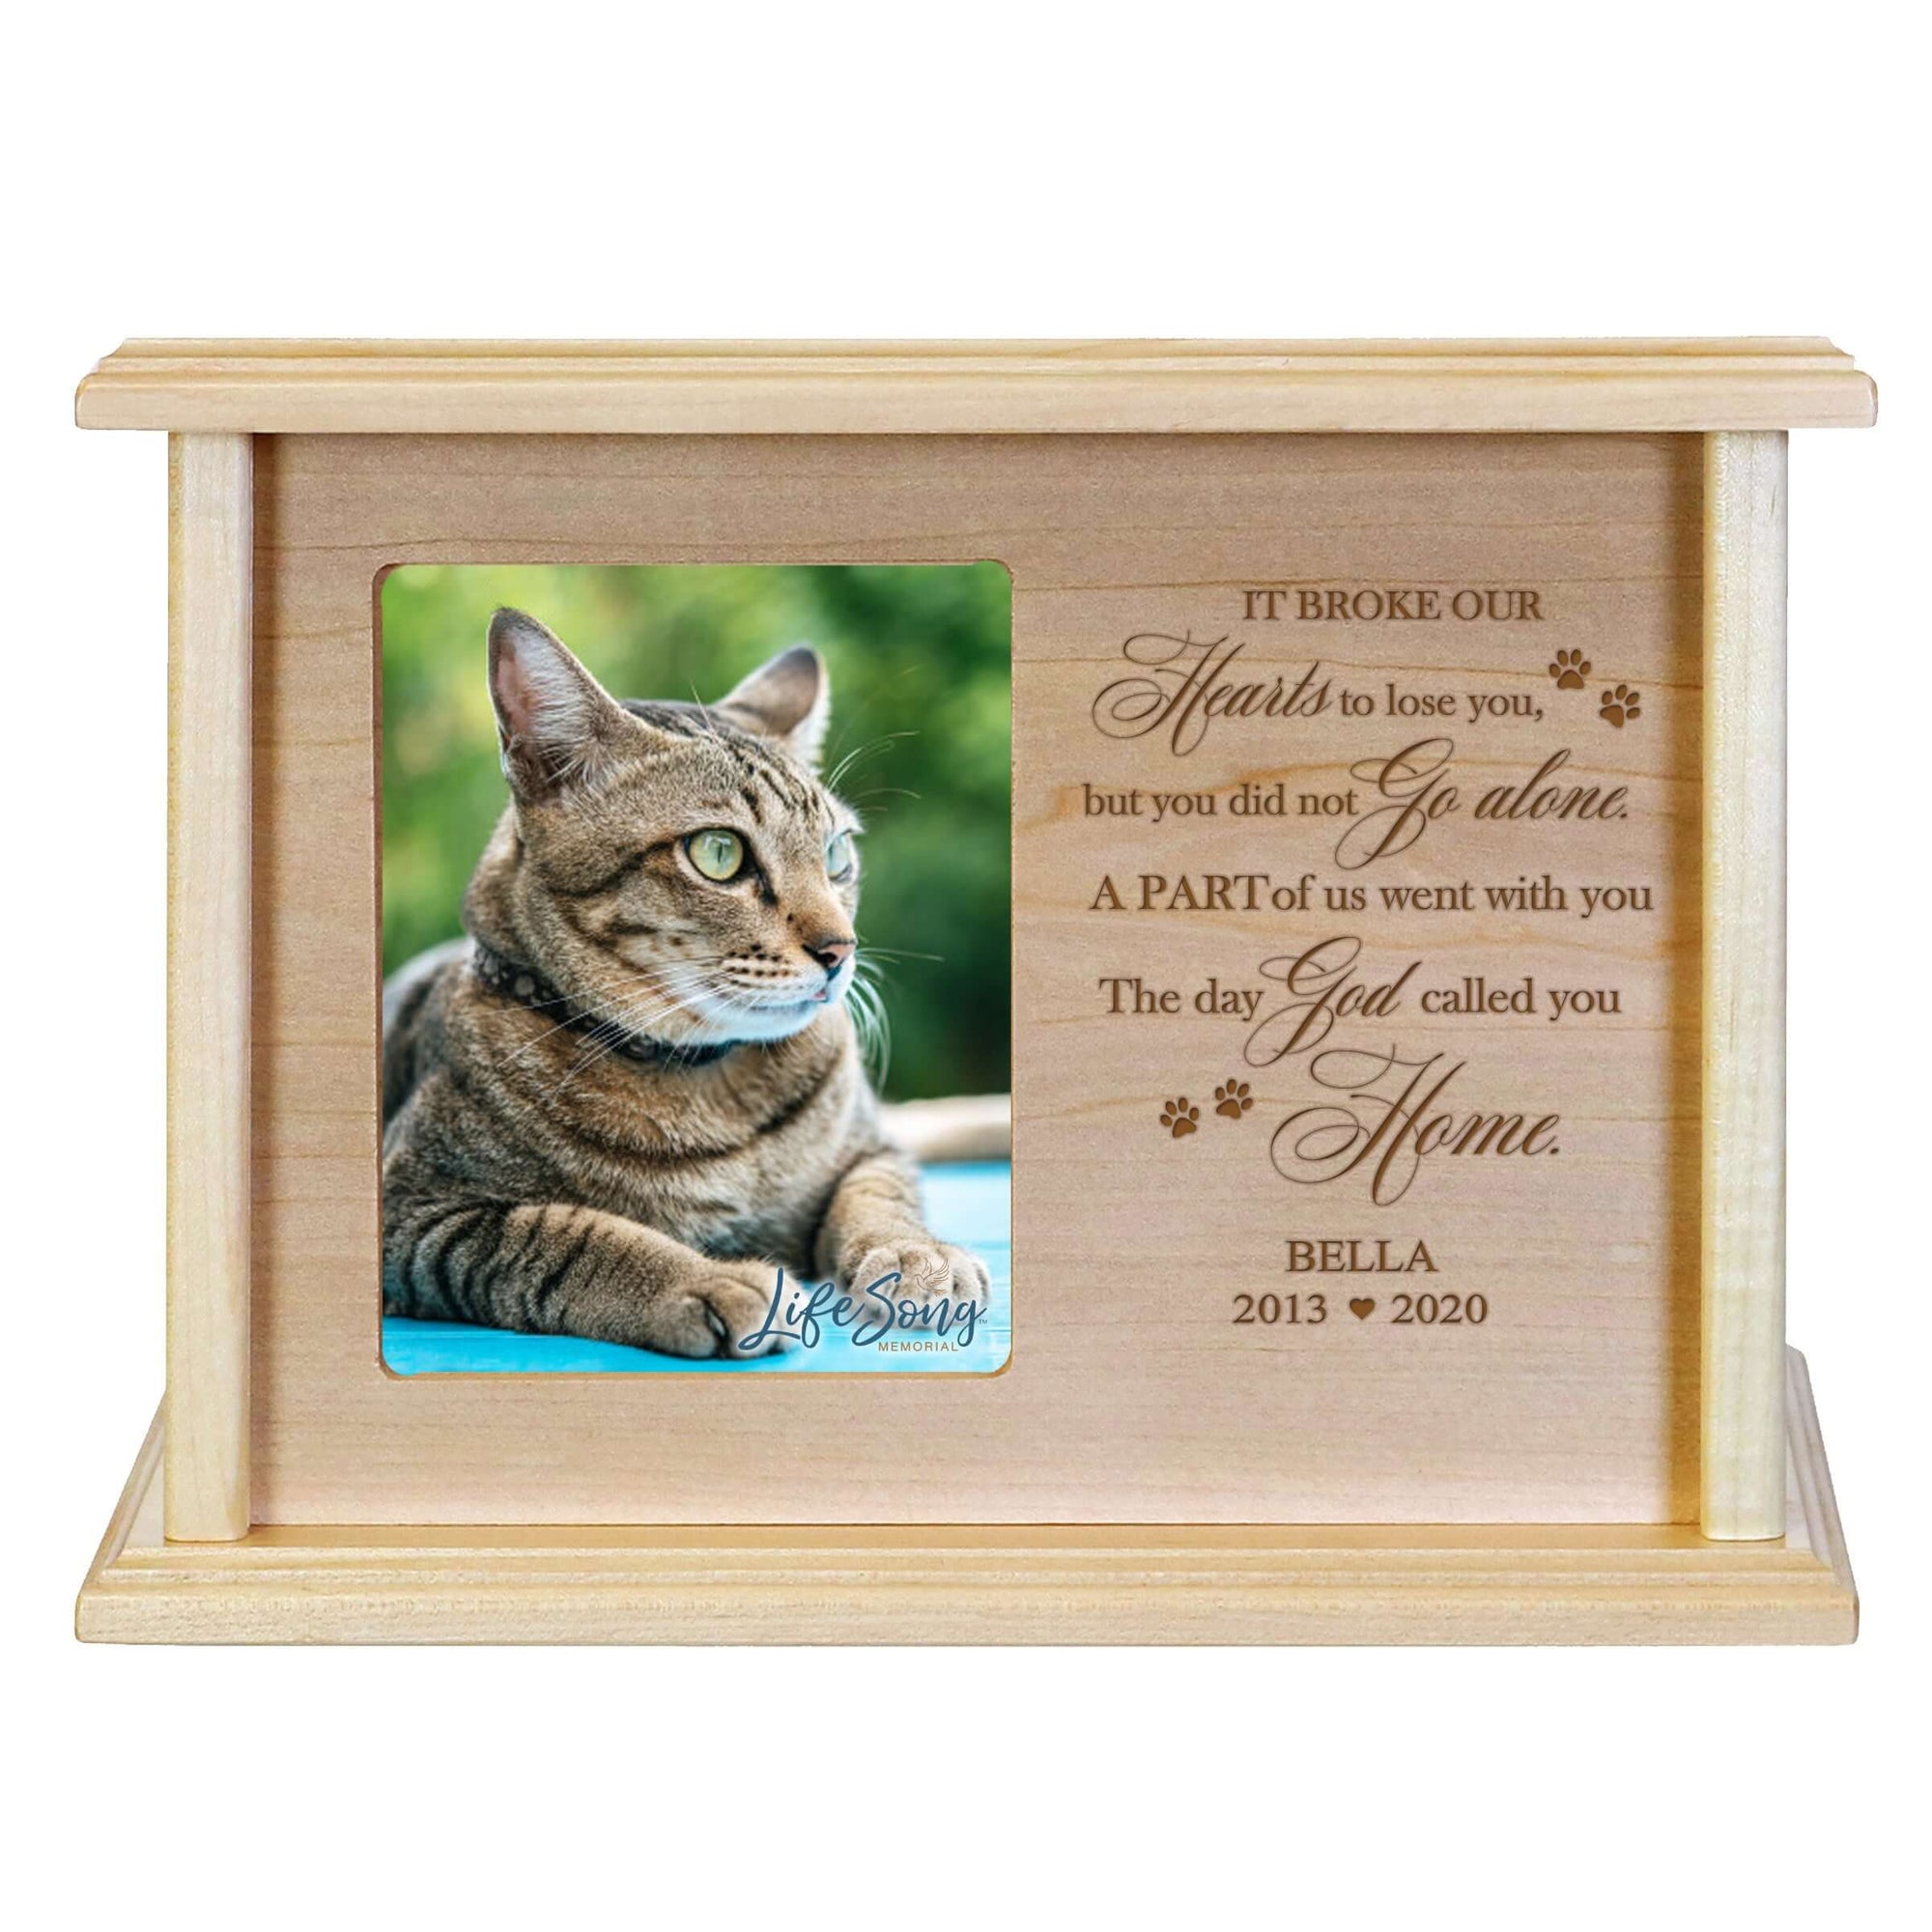 Pet Memorial Picture Cremation Urn Box for Dog or Cat - It Broke Our Hearts To Lose You